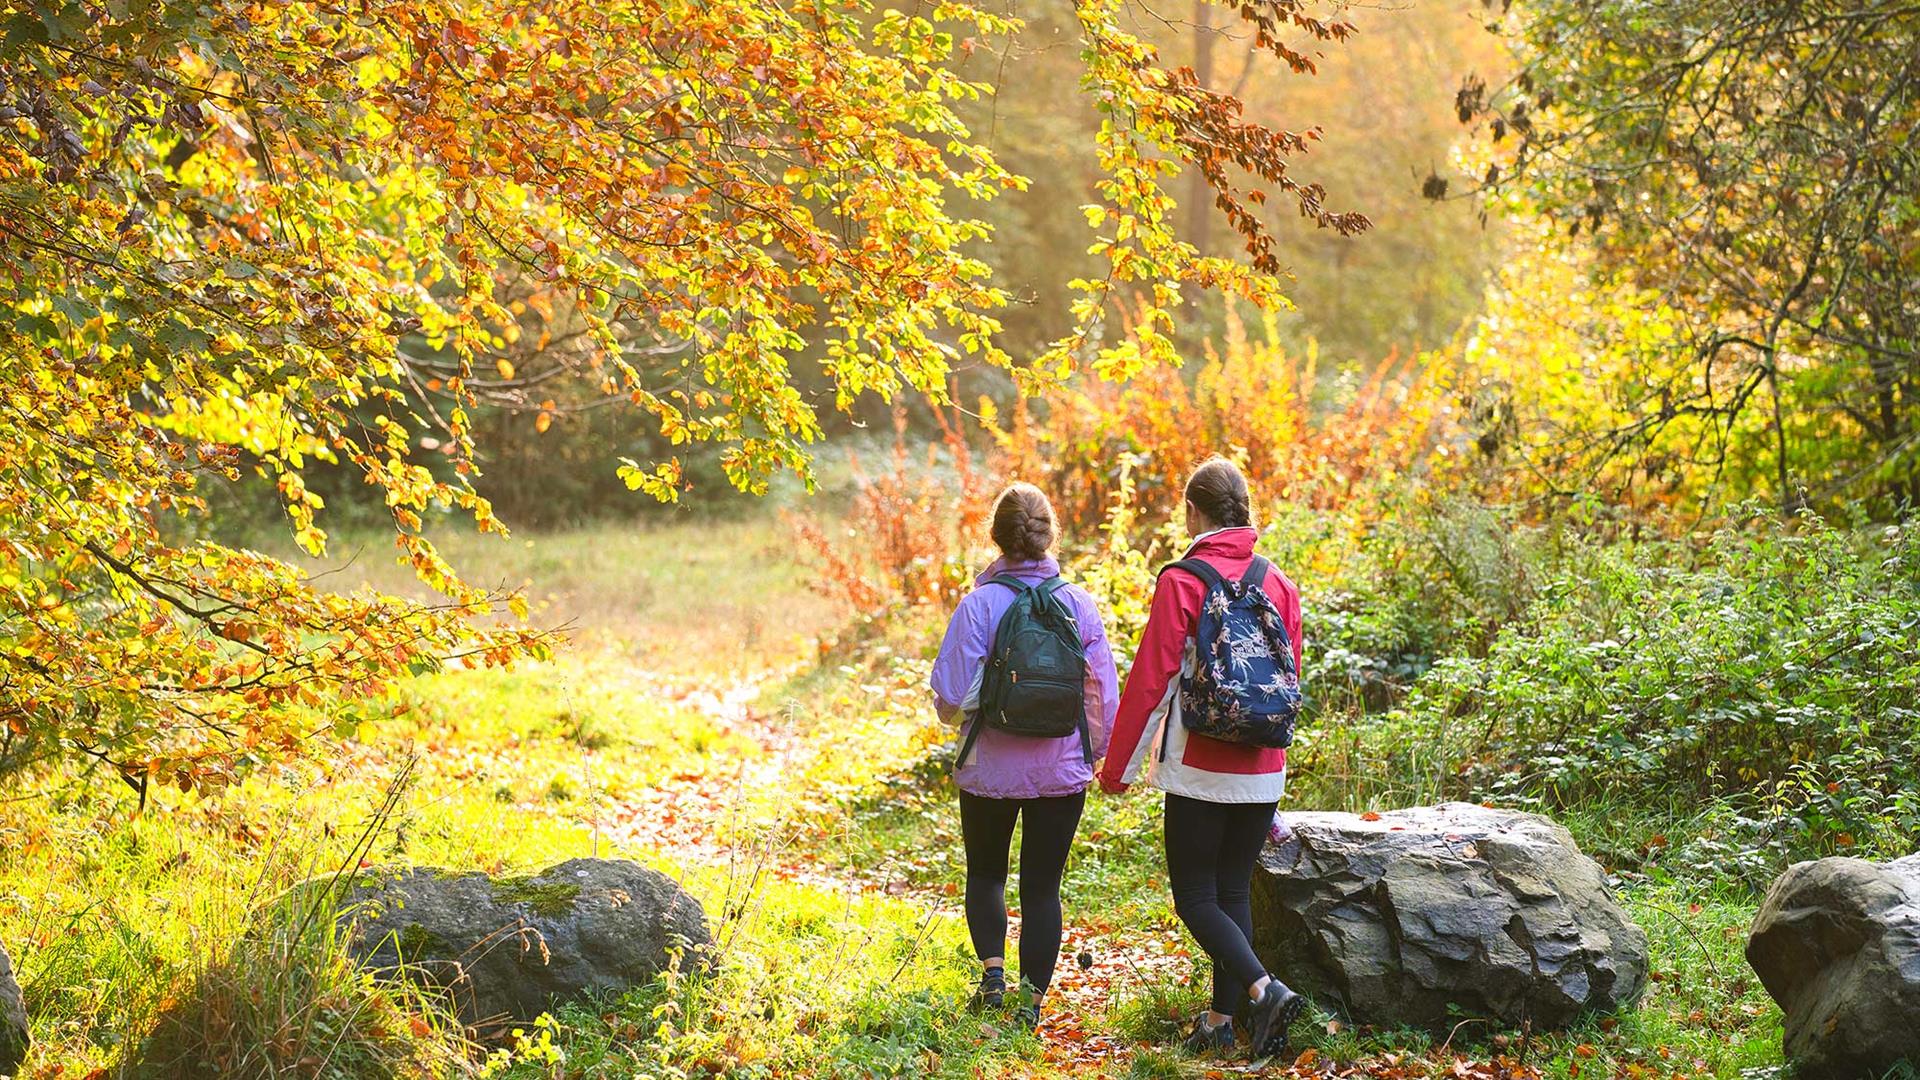 Women walking through the forest with backpacks